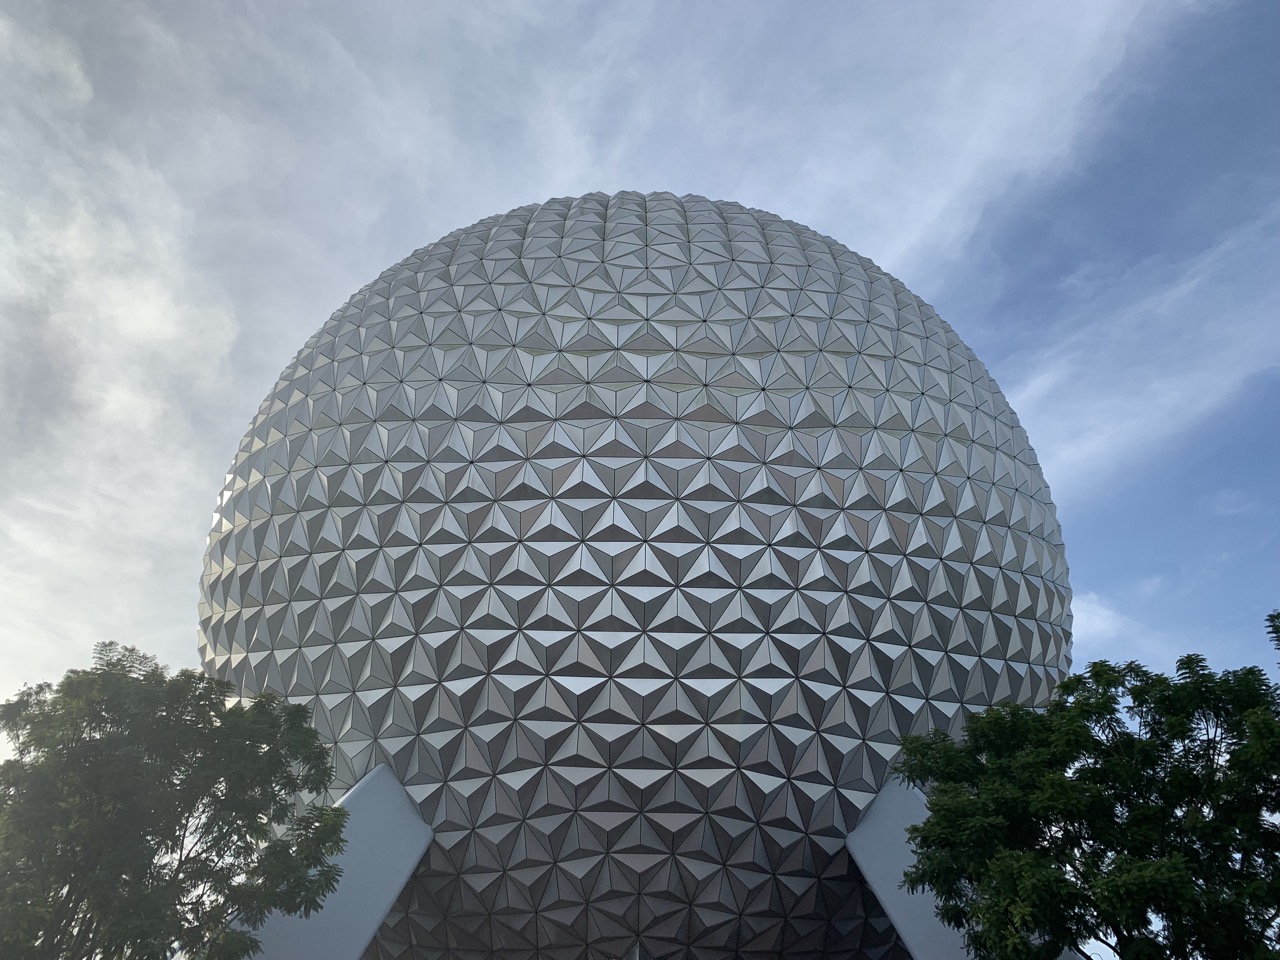 https://www.mousehacking.com/blog/best-rides-for-toddlers-at-epcot